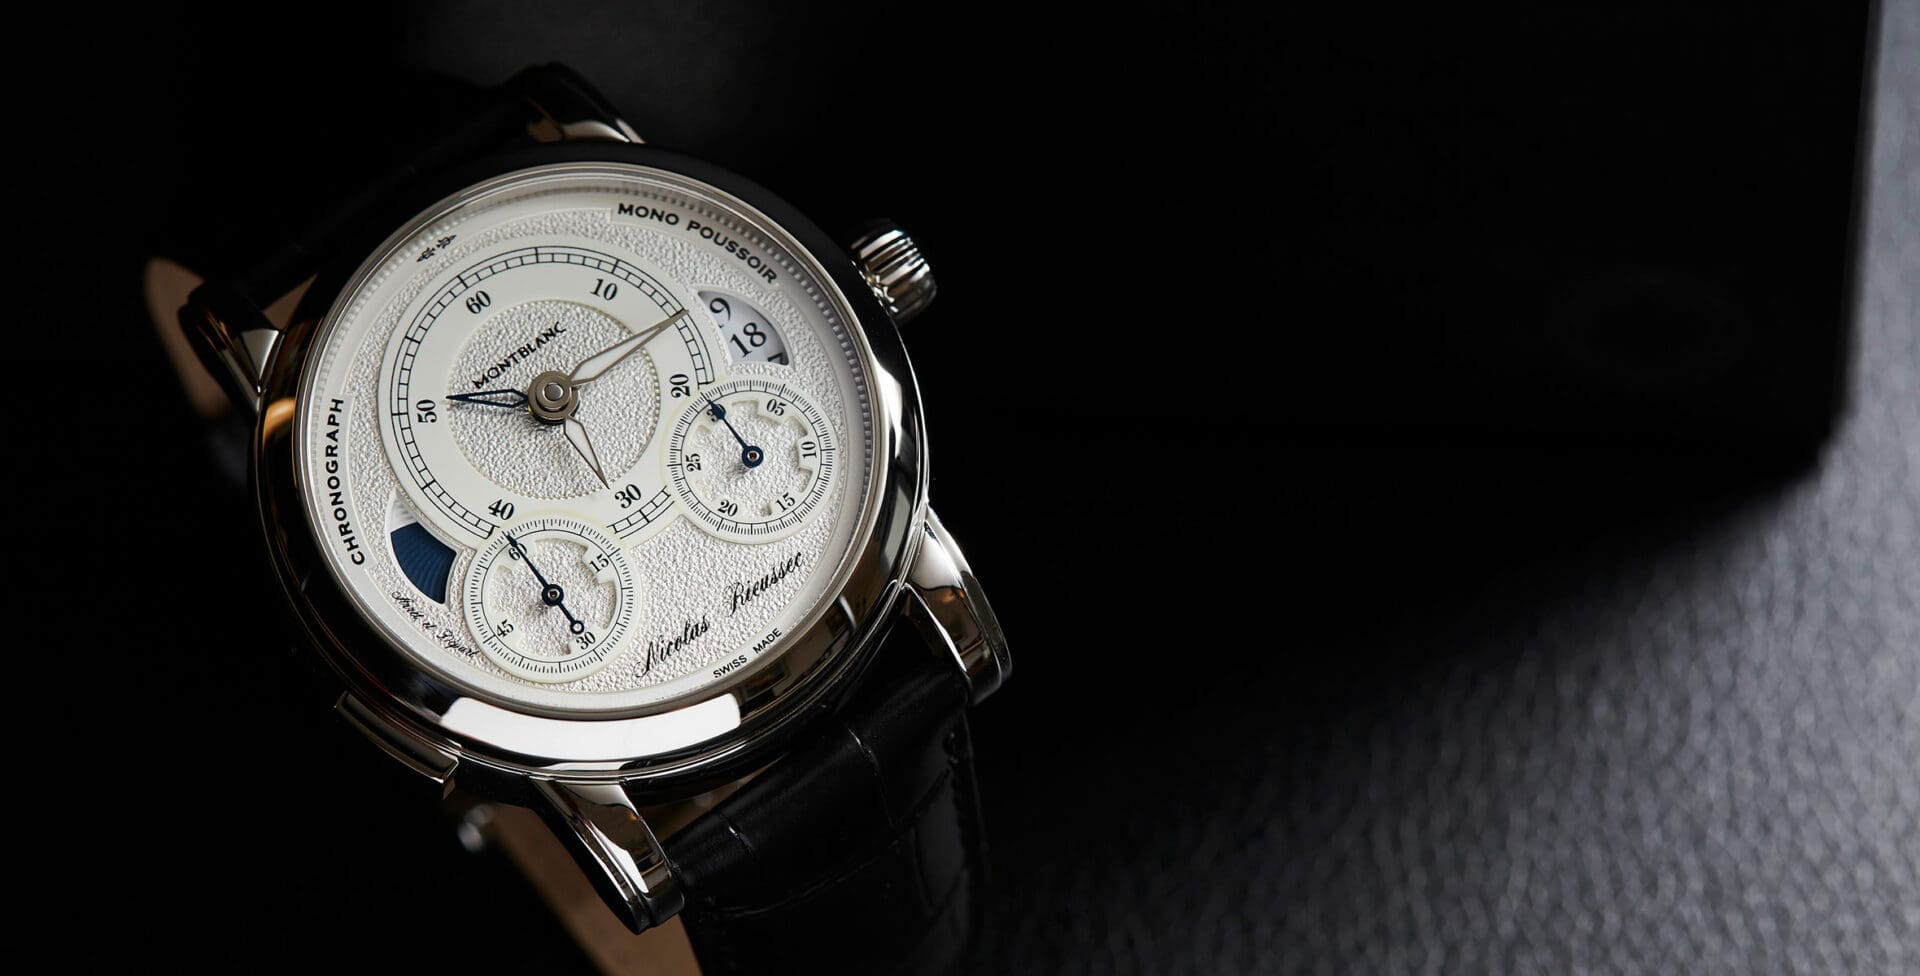 IN-DEPTH: The Montblanc Homage to Nicolas Rieussec II Limited Edition